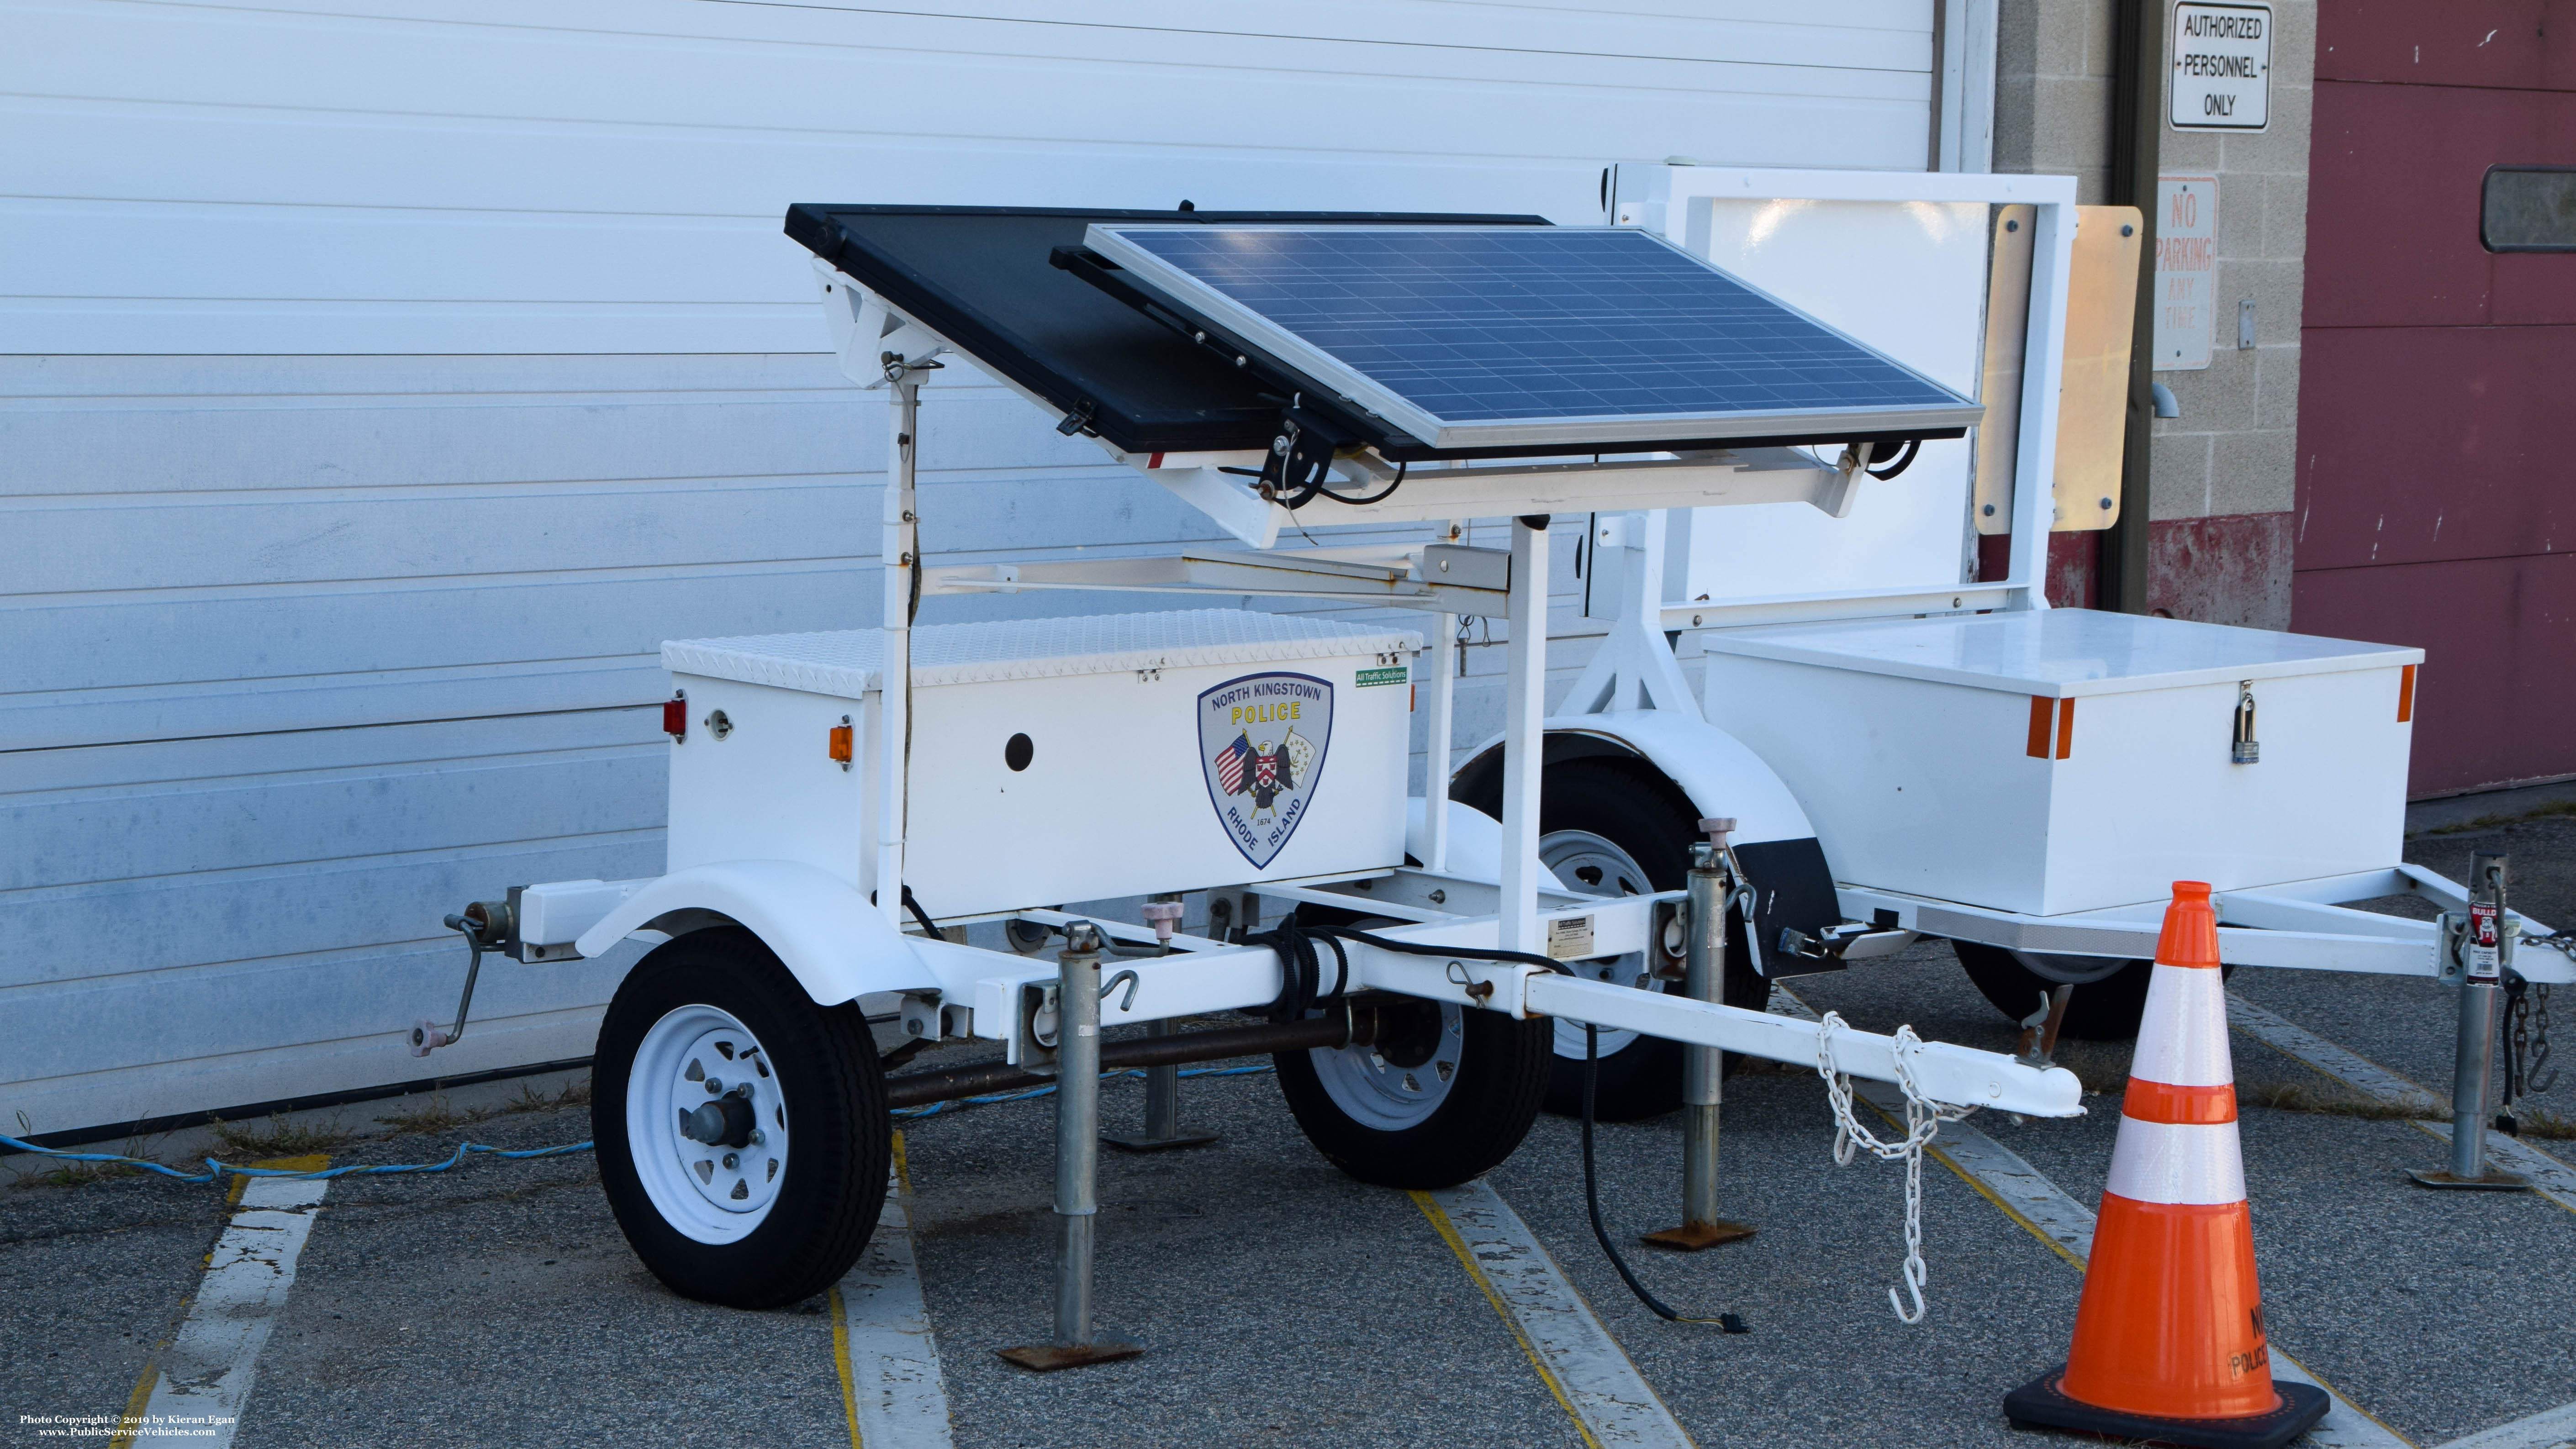 A photo  of North Kingstown Police
            Speed Trailer, a 2006-2019 All Traffic Solutions Speed Trailer             taken by Kieran Egan